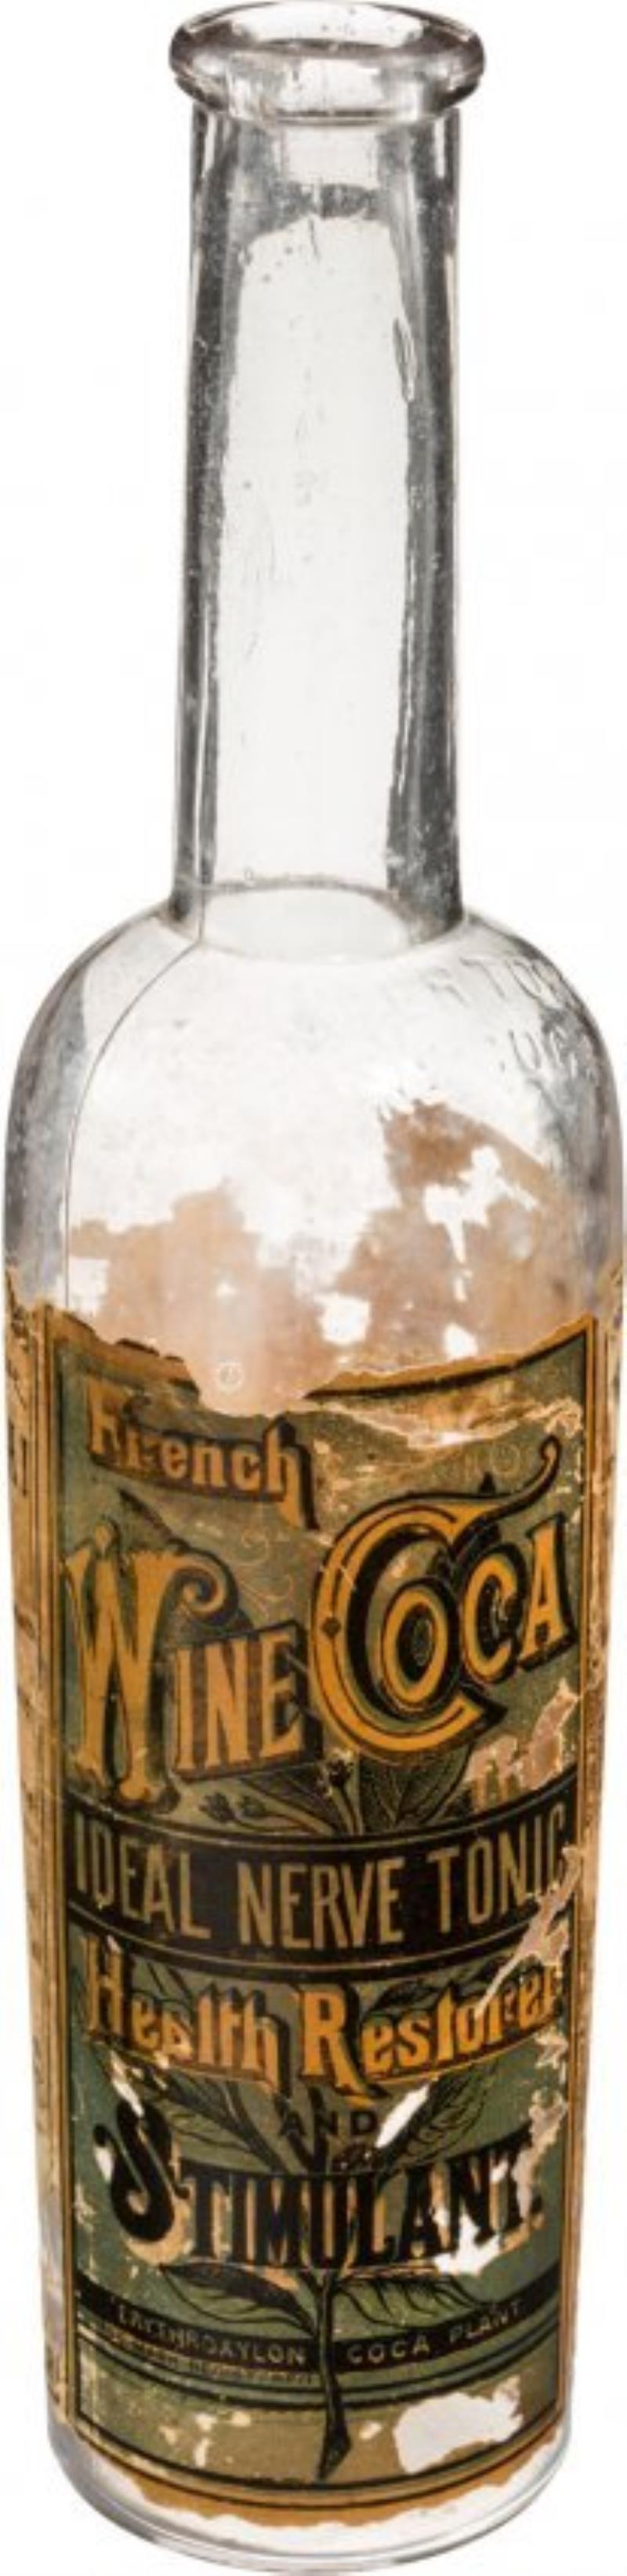 French Wine Coca Bottle with Original Paper Labe